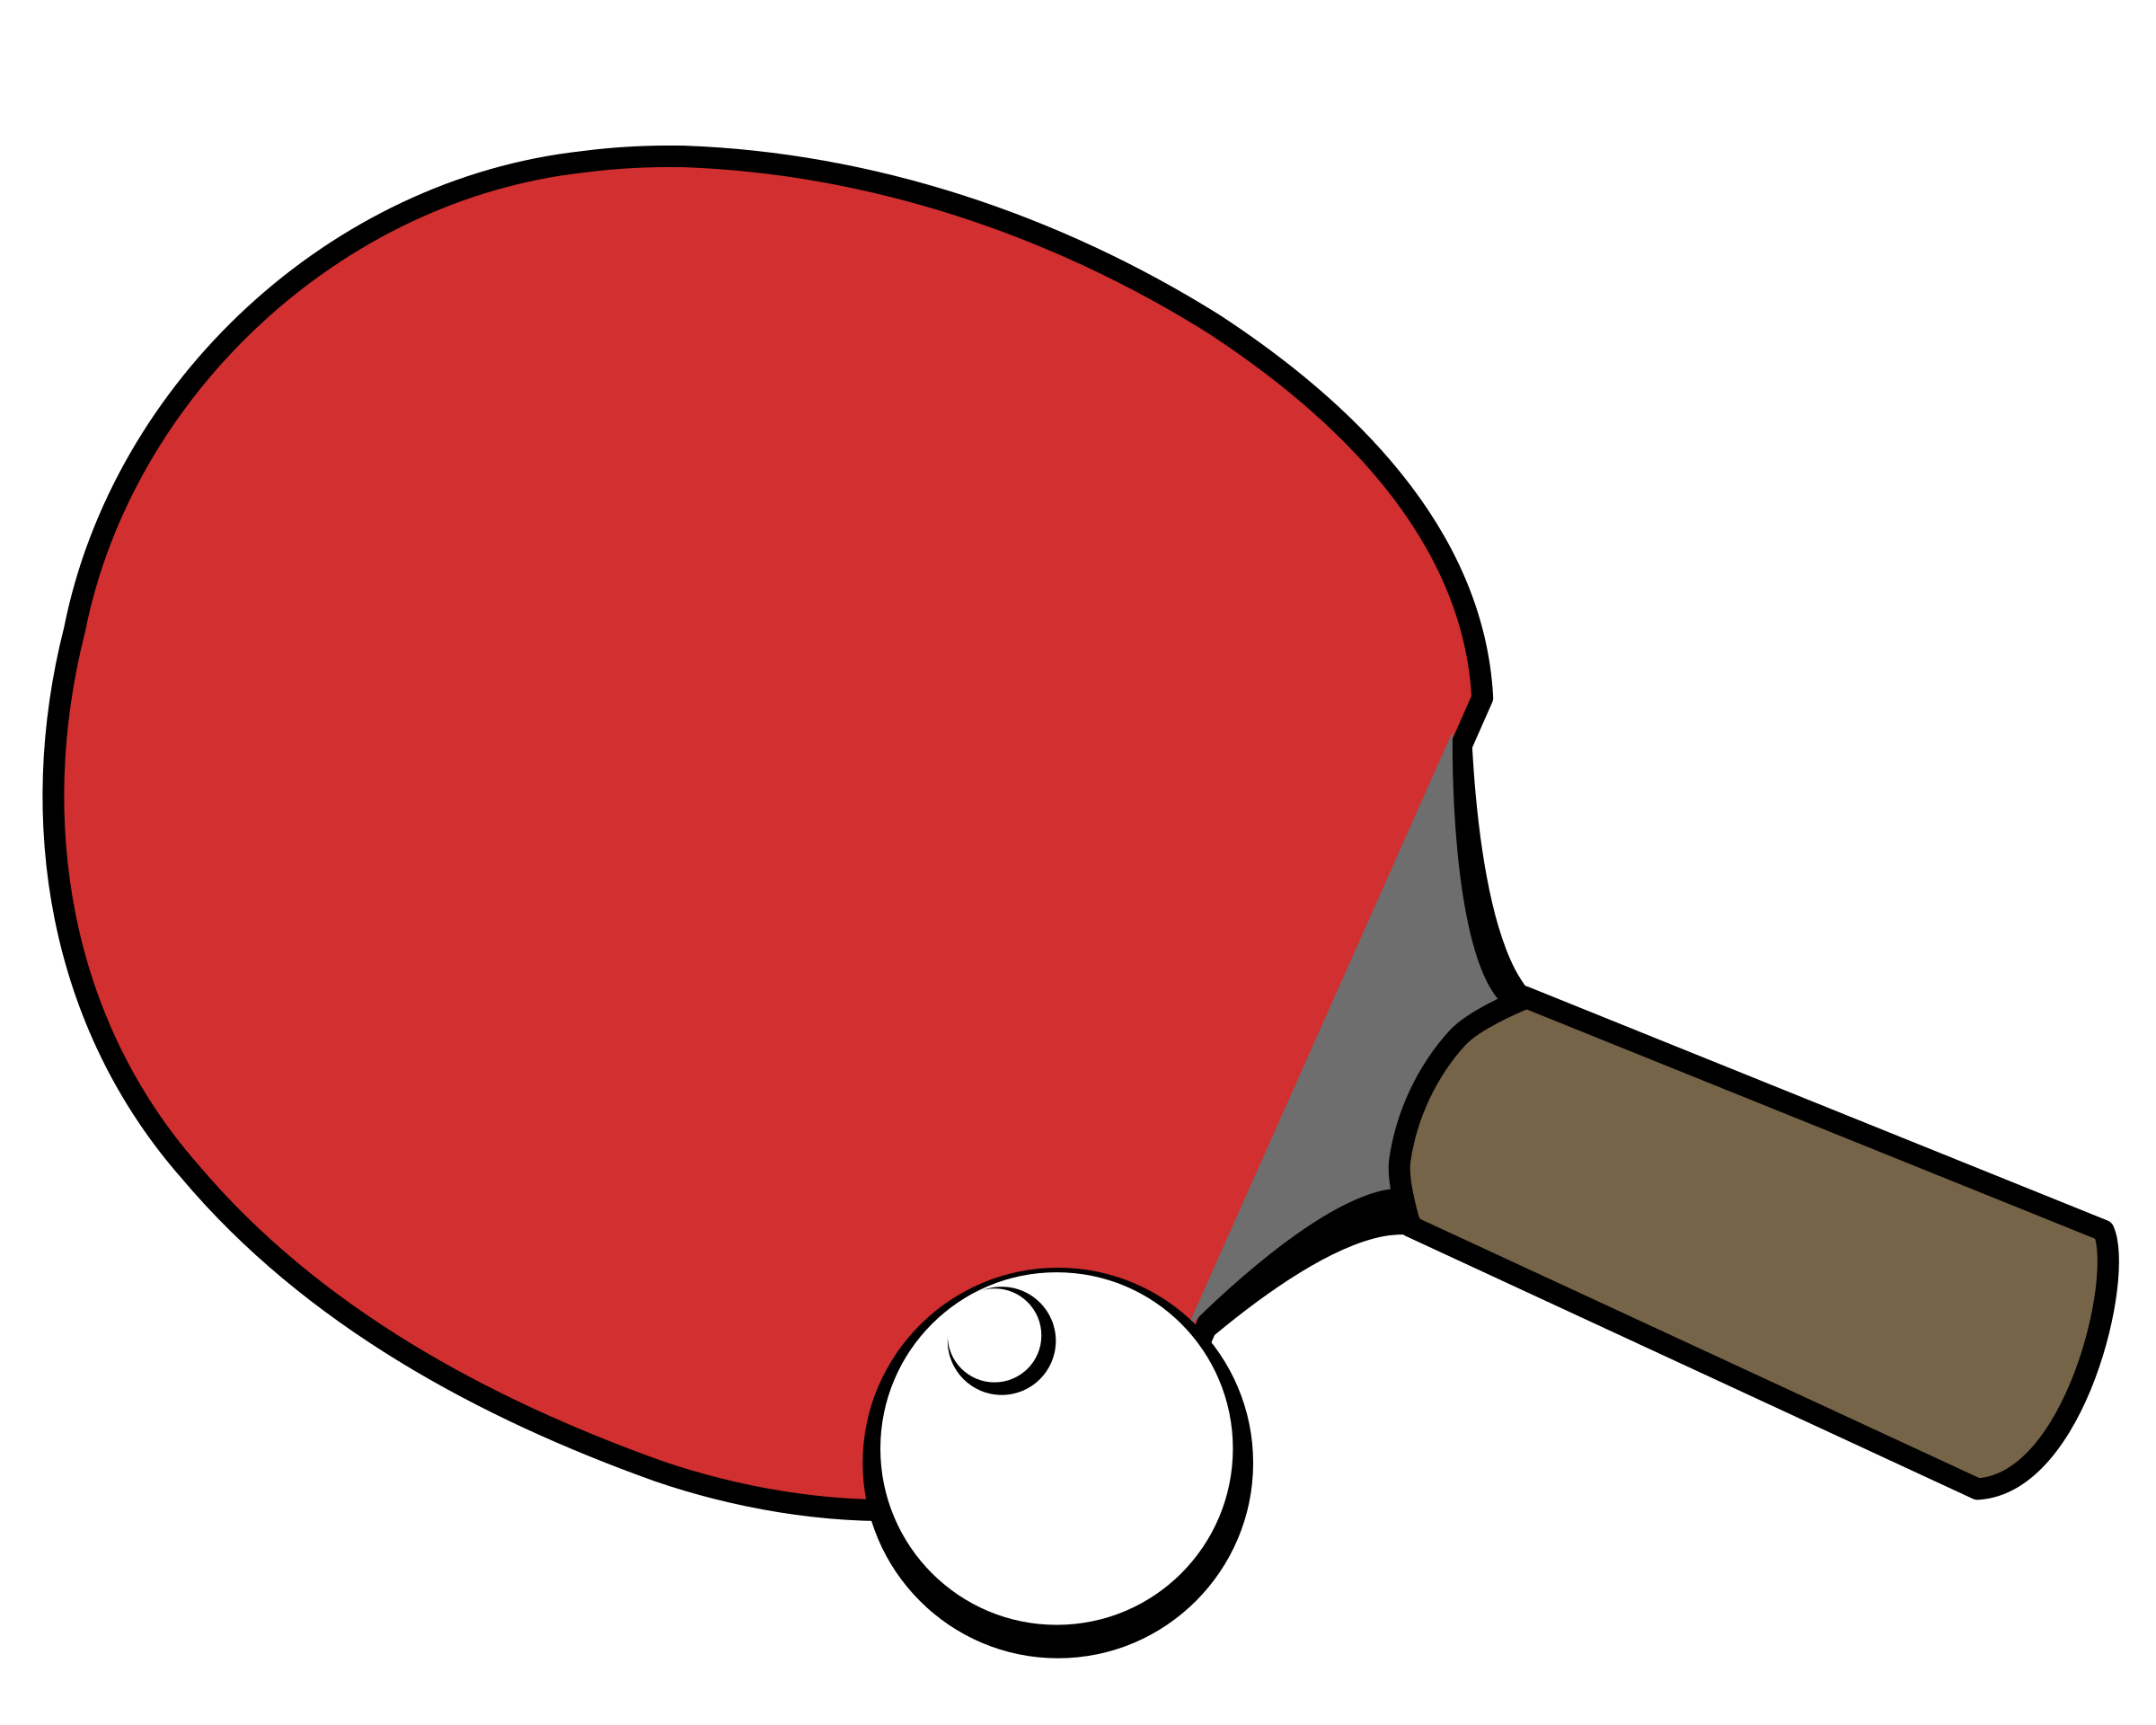 clipart sports table tennis